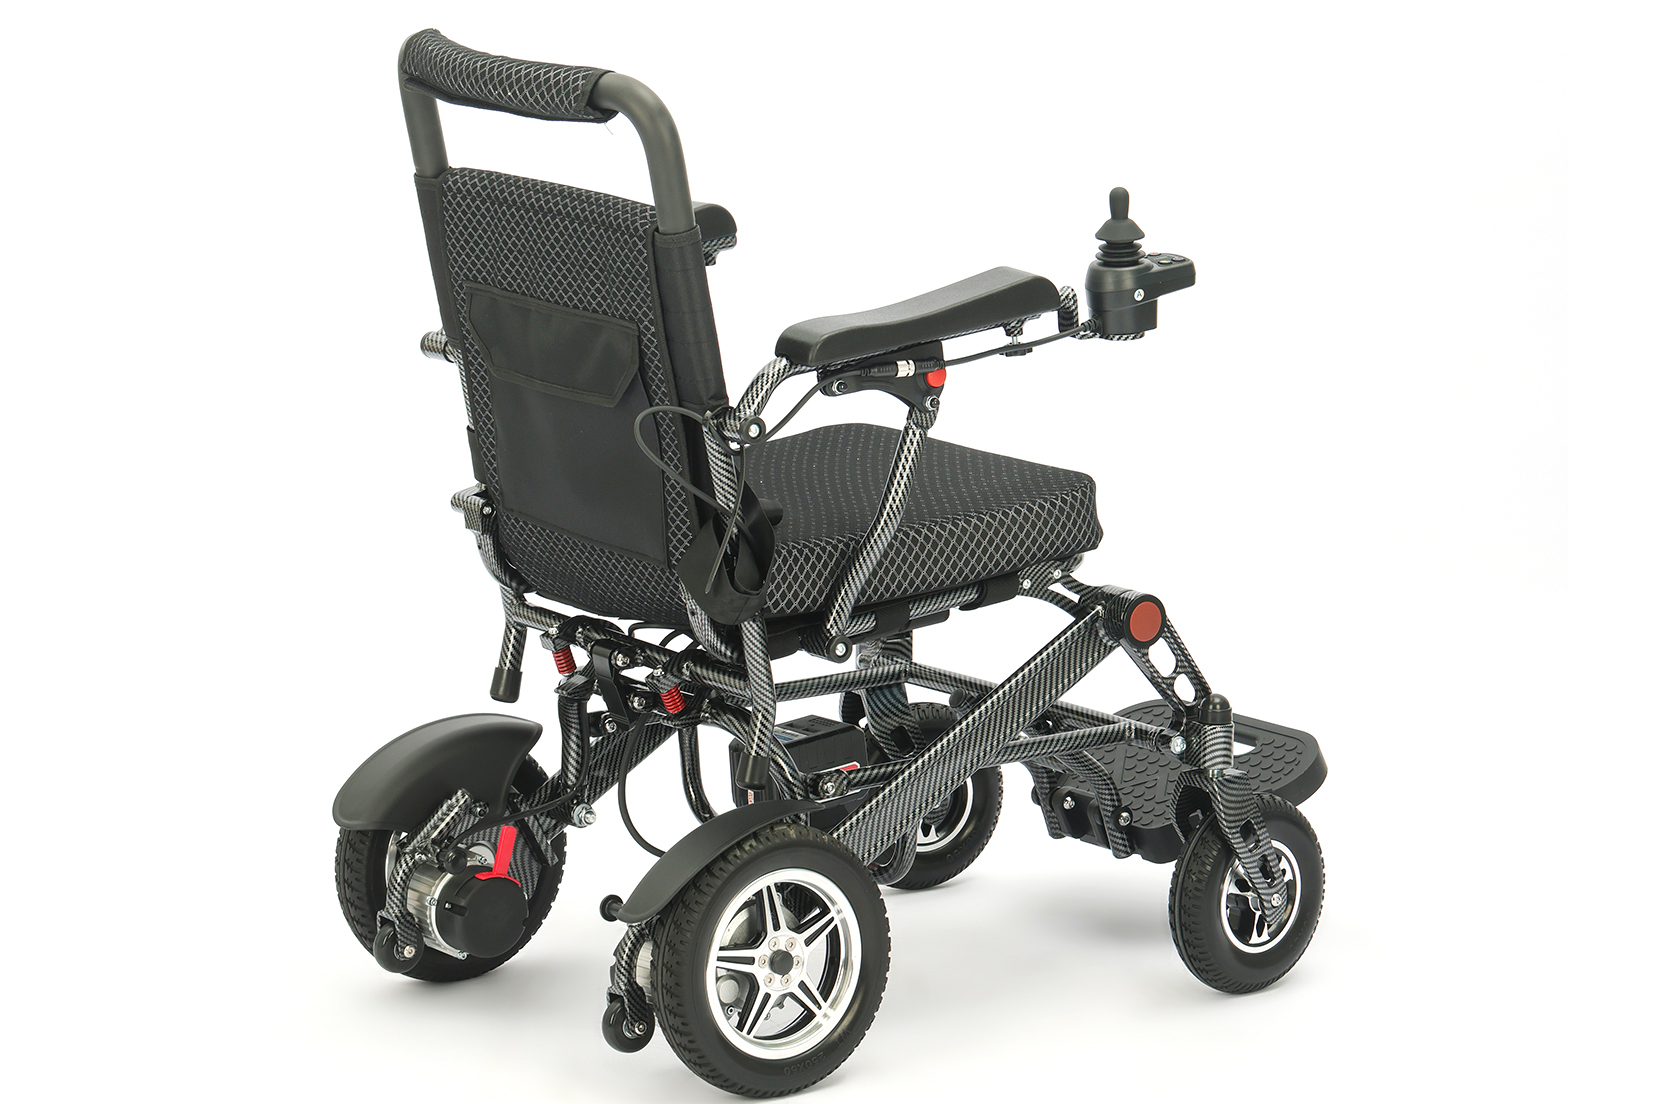 How much do you know about electric wheelchairs?-The history of the electric wheelchair’s development